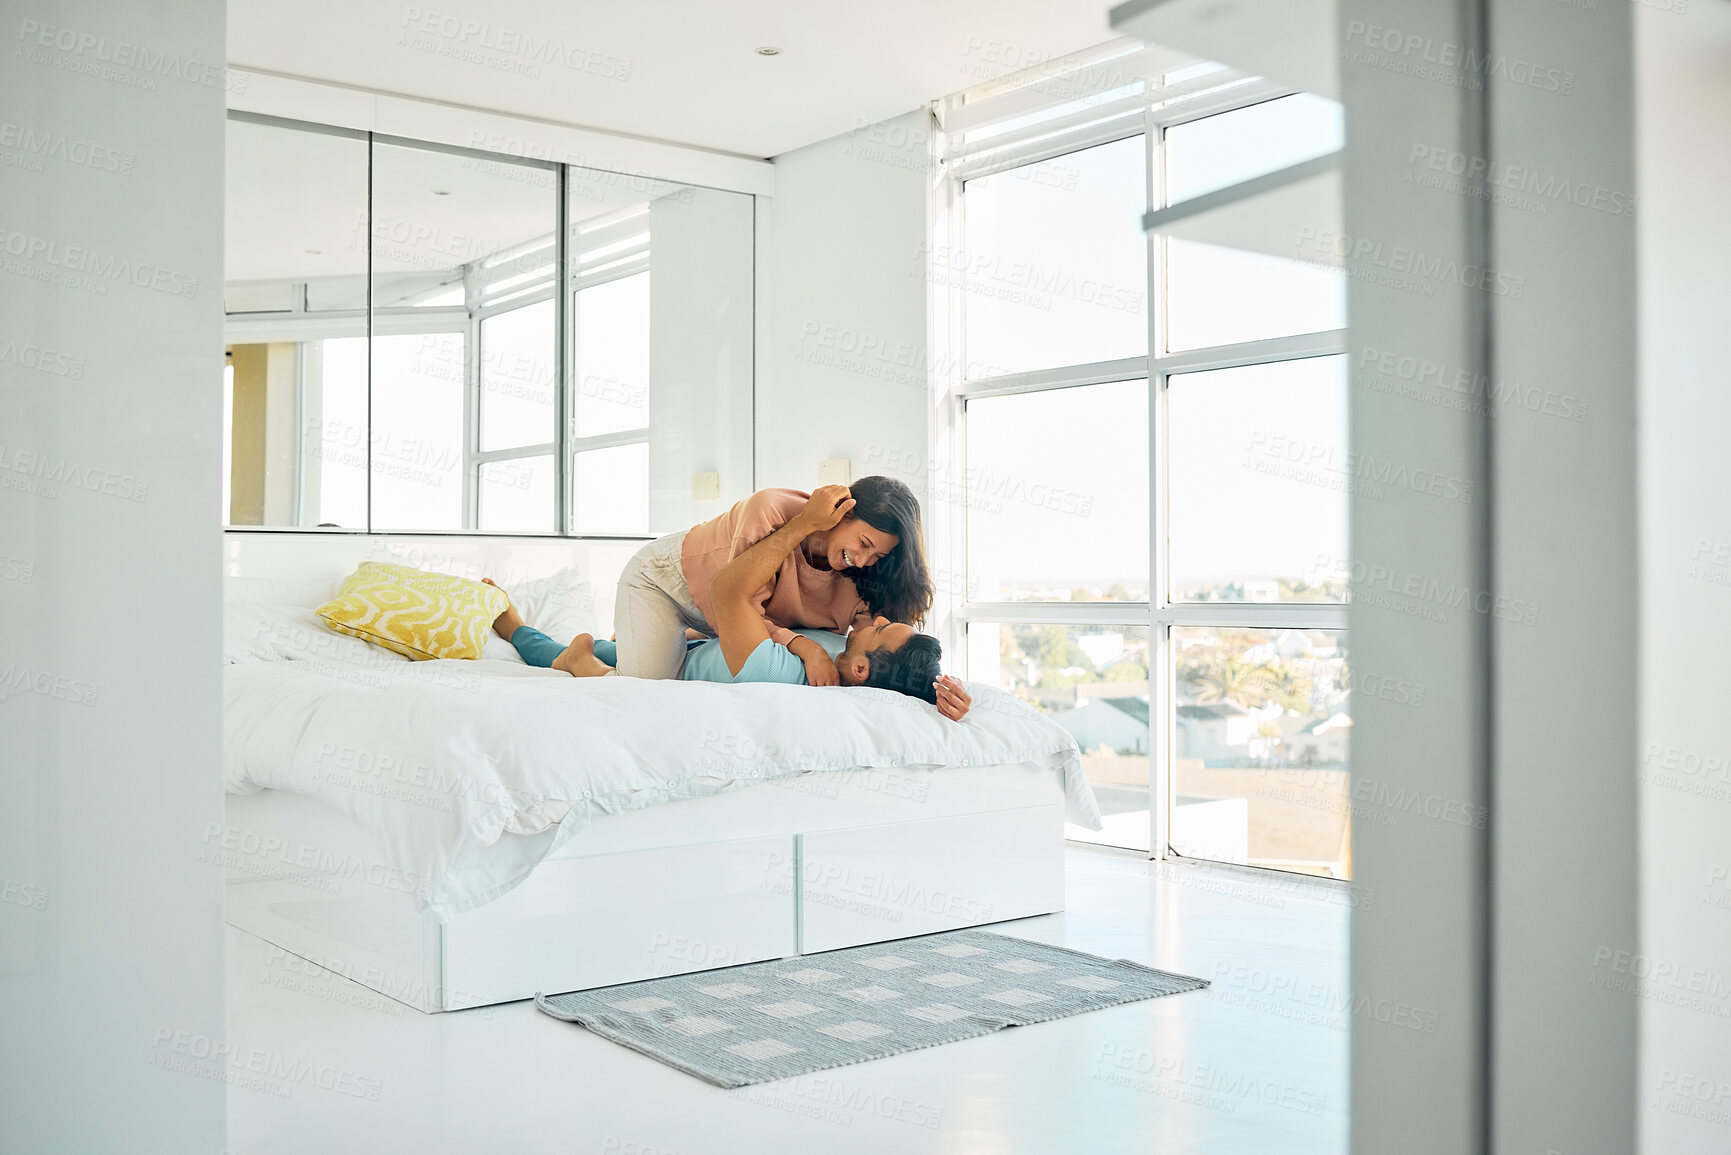 Buy stock photo Happy playful young mixed race woman kneeling on top of her boyfriend in bed at home. Romantic couple bonding in their bedroom in the morning. Carefree boyfriend and girlfriend laughing while intimate